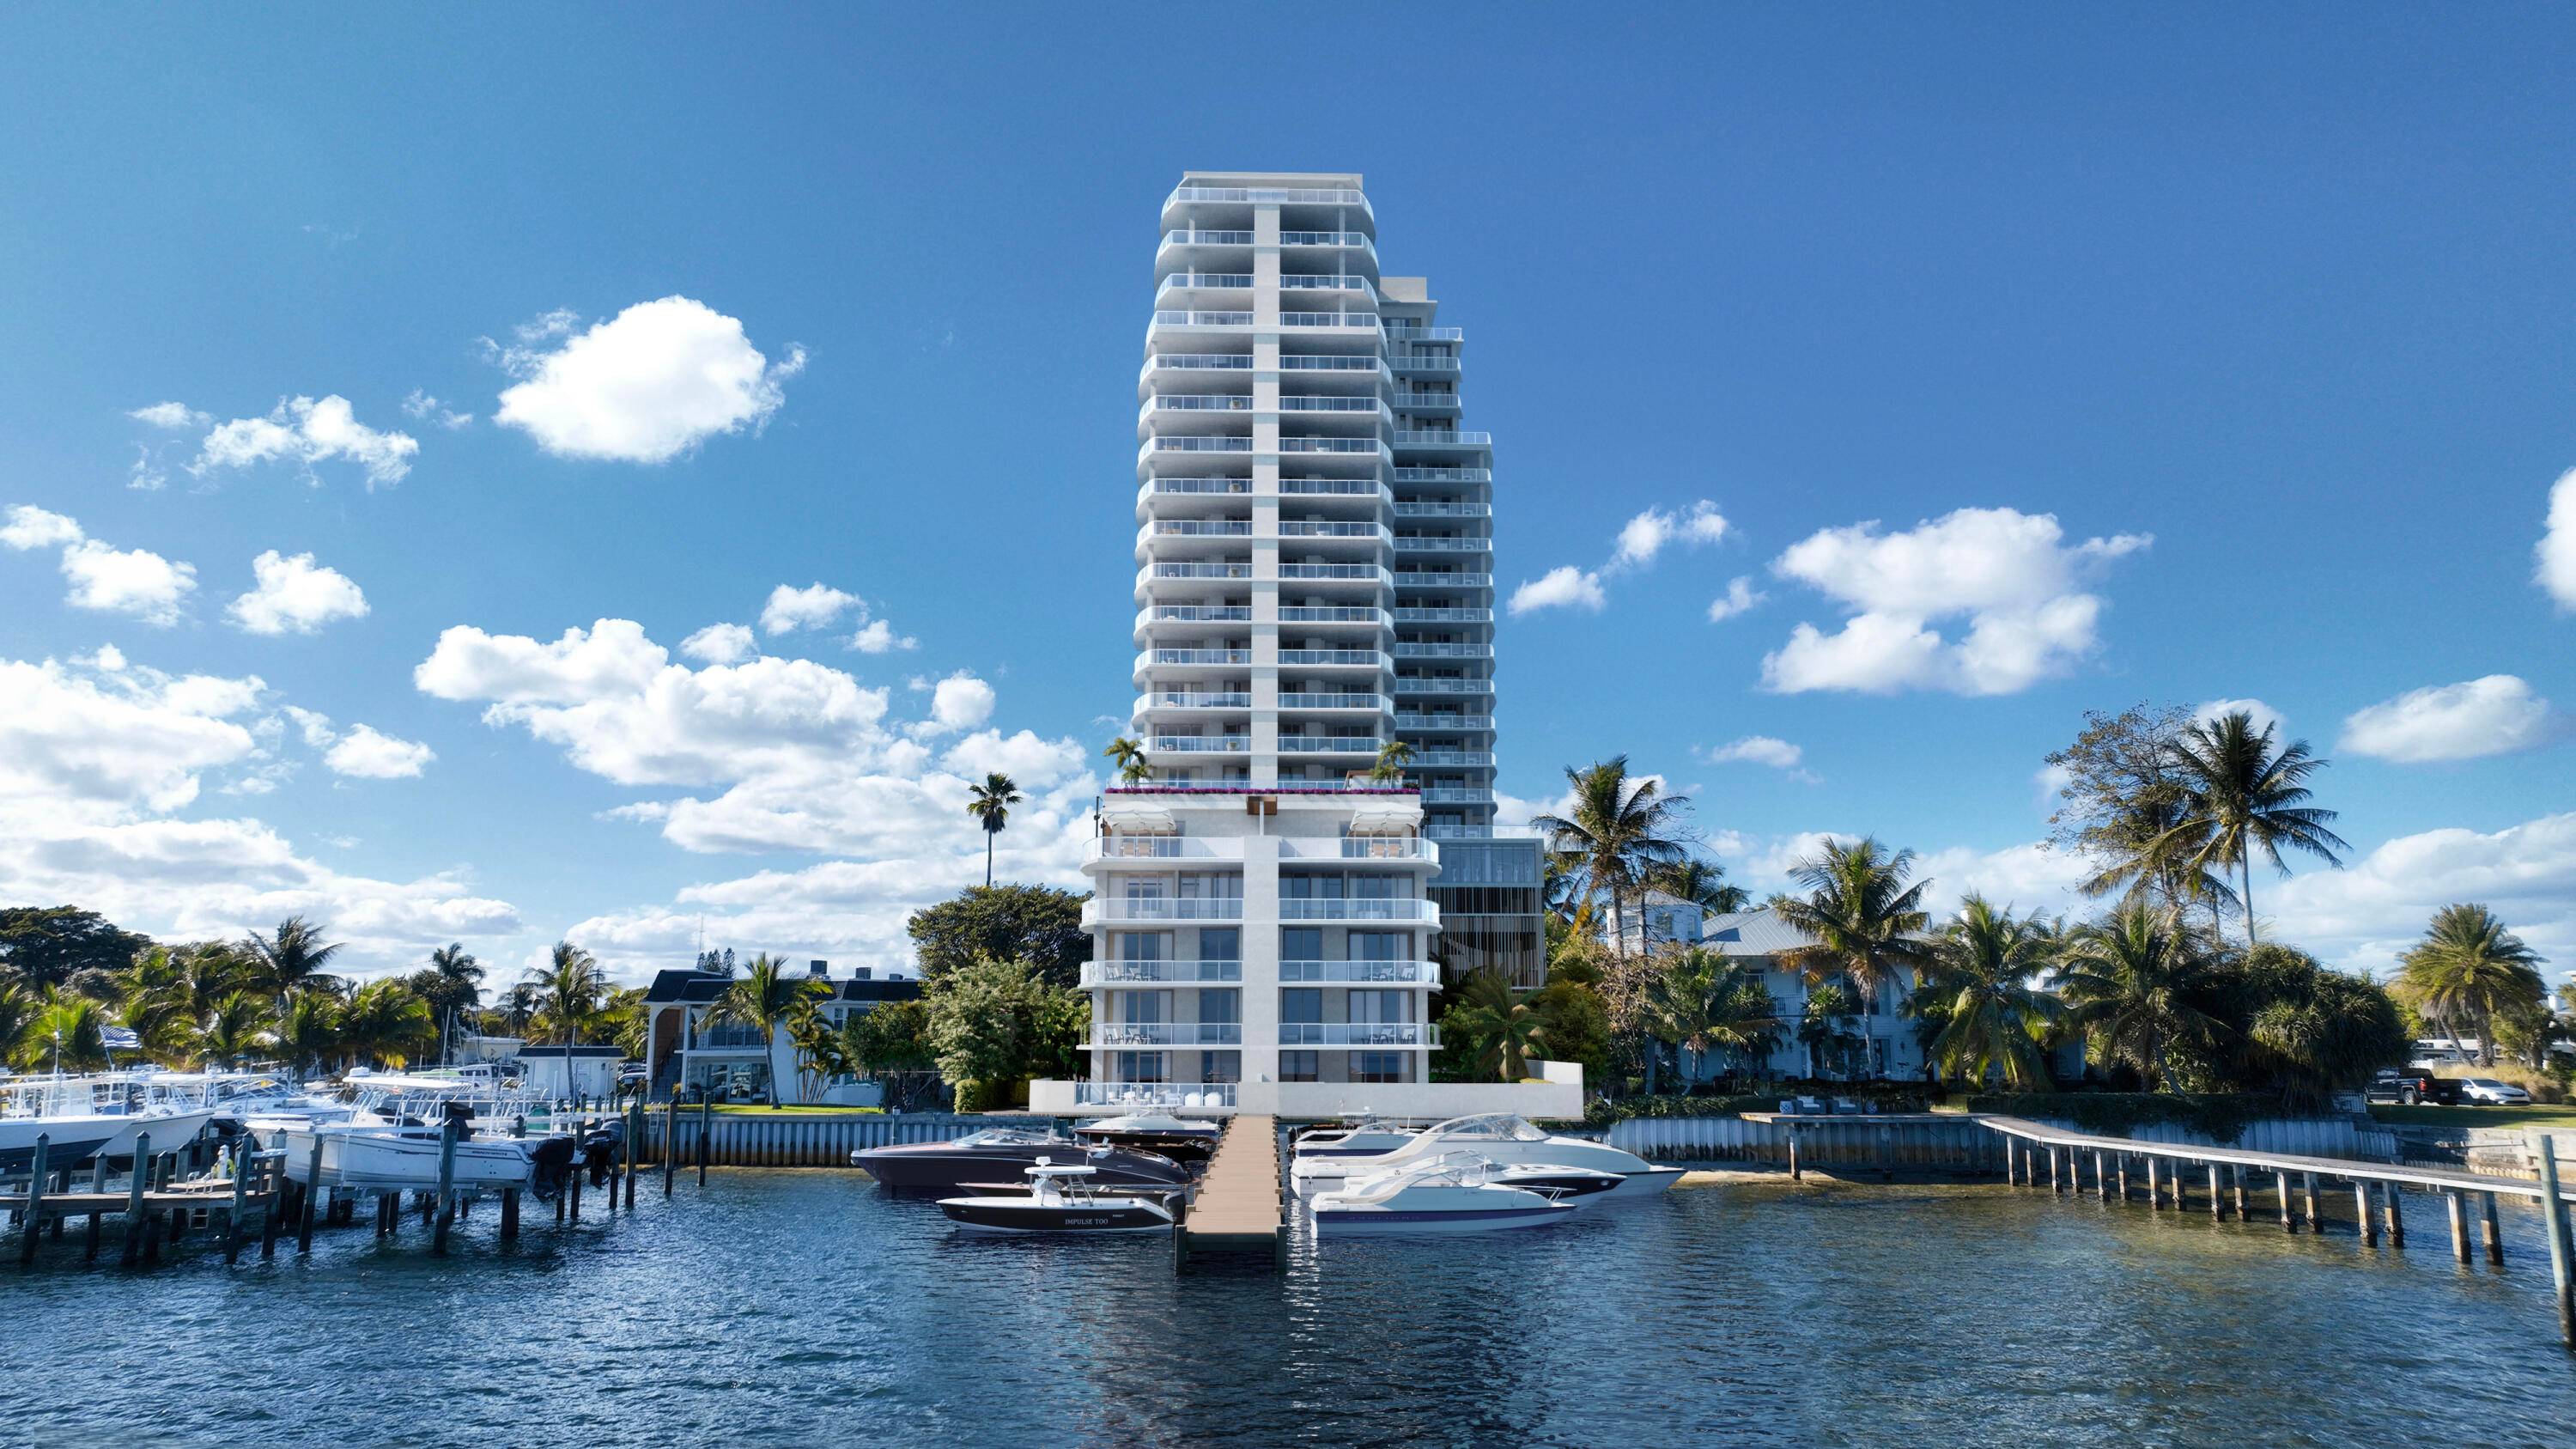 Introducing Alba, an exquisite collection of 55 luxury residences, ranging from 2 to 4 bedrooms, within a 22 story boutique direct waterfront building.